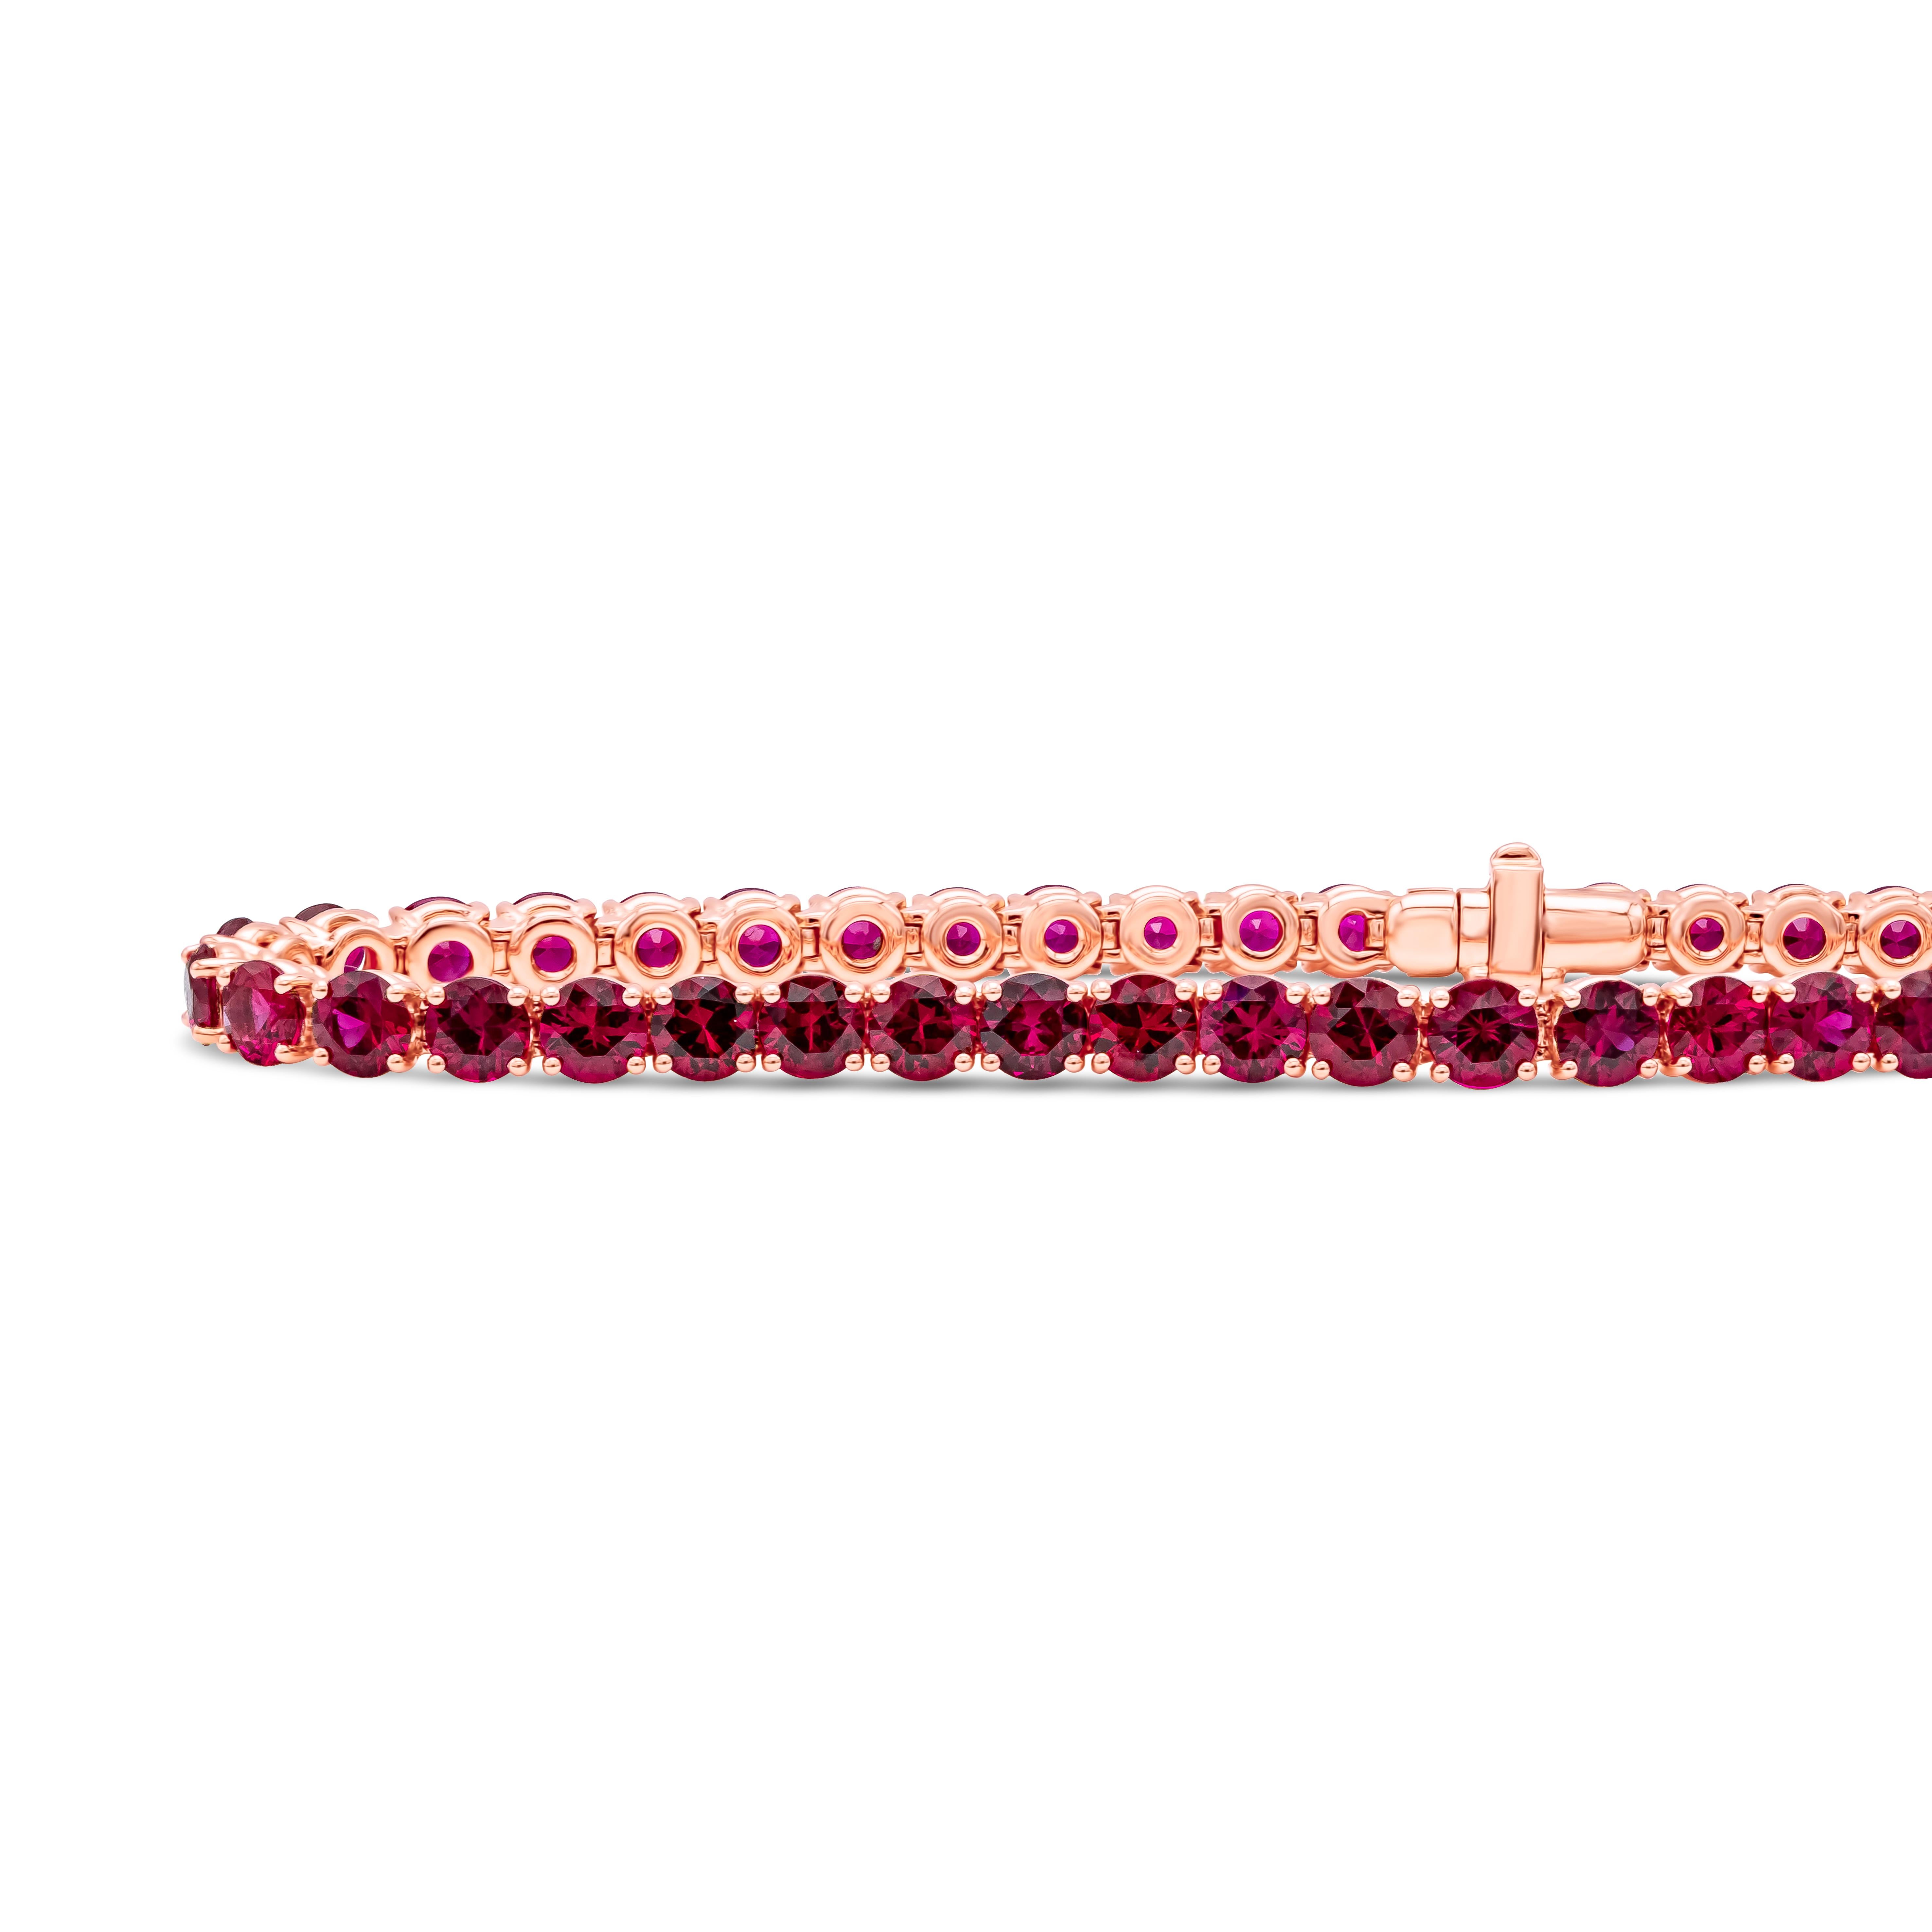 A simple yet chic piece of tennis bracelet features a row of round brilliant Burmese rubies. Mounted in 18K Rose Gold. The weight of the rubies is 9.39 carats in total. Matched to perfection.

Roman Malakov is a custom house, specializing in